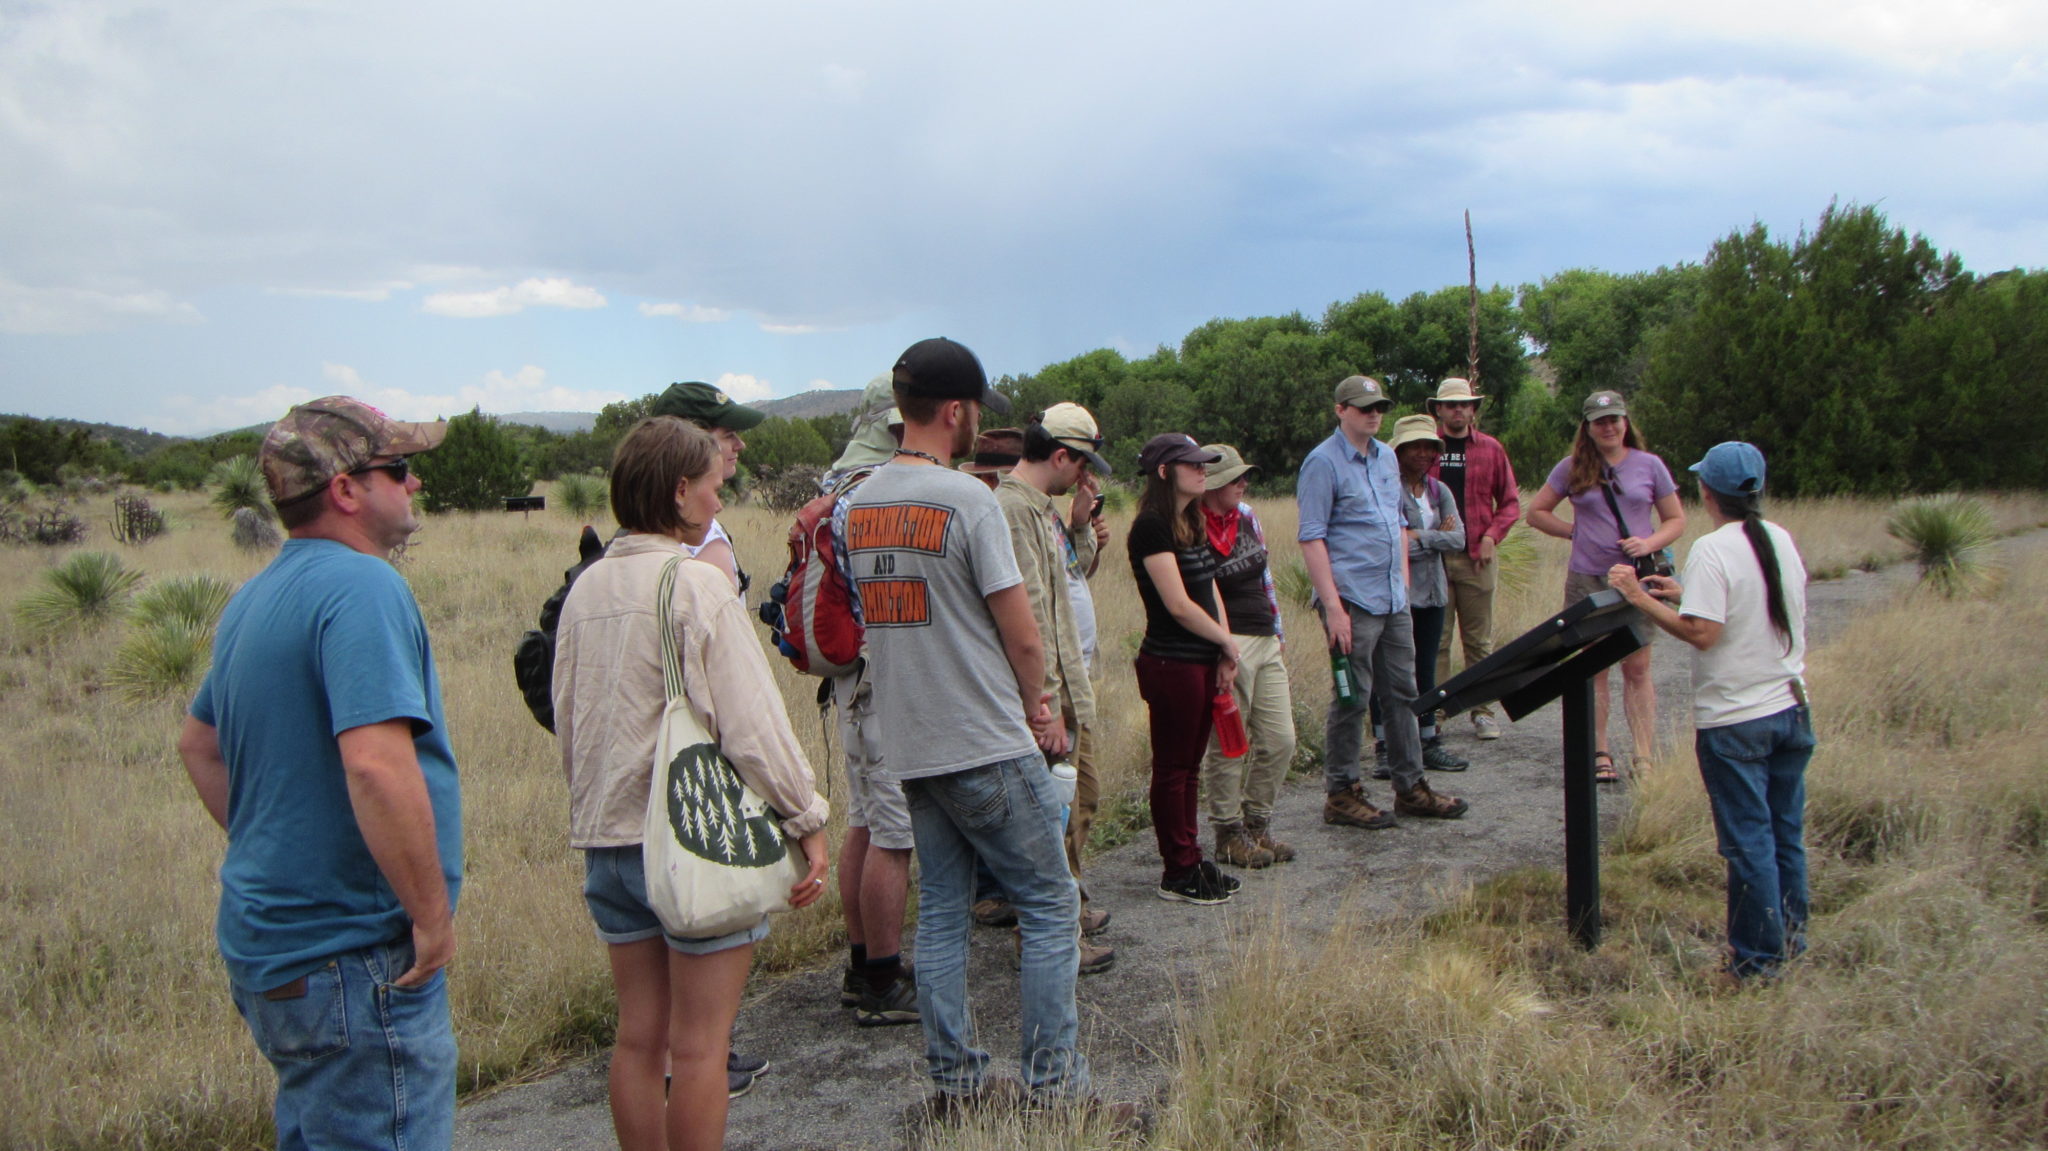 Preservation Archaeology Field School students touring the Mattocks site.